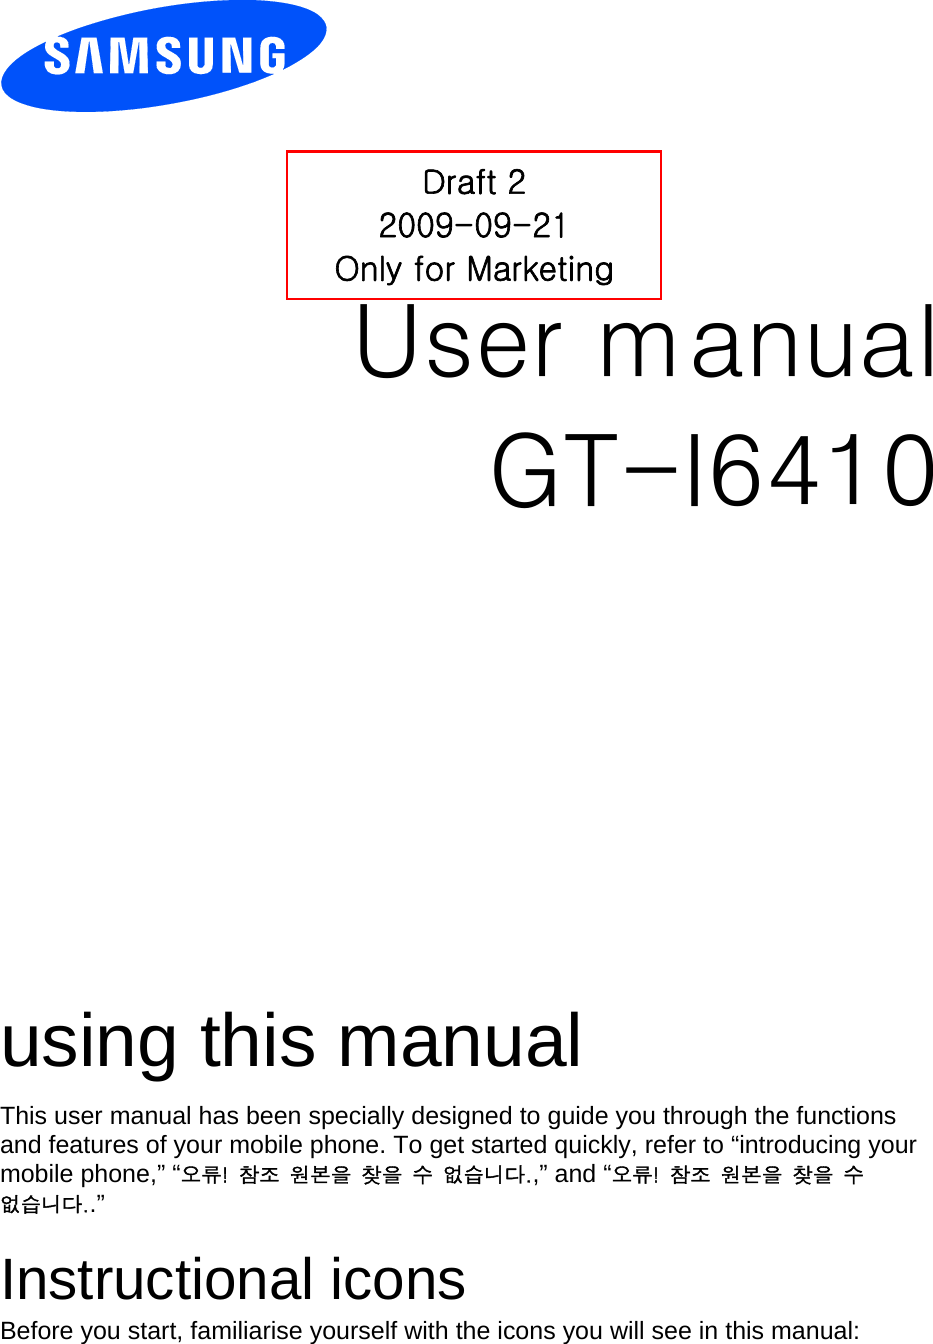          User manual Draft 2 2009-09-21 Only for Marketing GT-I6410                  using this manual This user manual has been specially designed to guide you through the functions and features of your mobile phone. To get started quickly, refer to “introducing your mobile phone,” “오류!  참조  원본을  찾을  수  없습니다.,” and “오류!  참조  원본을  찾을  수 없습니다..”  Instructional icons Before you start, familiarise yourself with the icons you will see in this manual:   